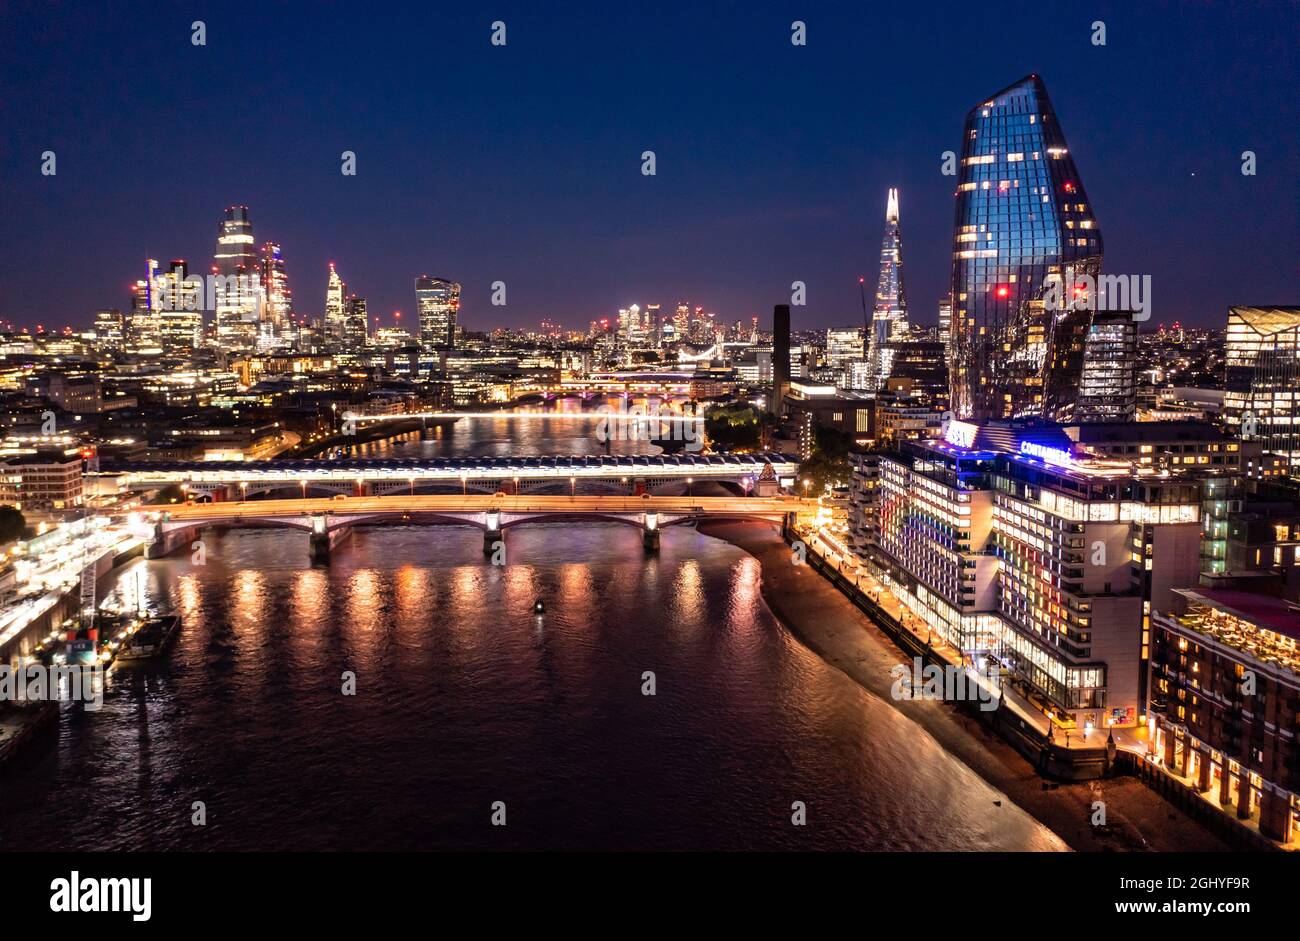 Night view of the beautiful London city with urban architectures bridge at distance with skyscrapers and small buildings around ocean water Stock Photo